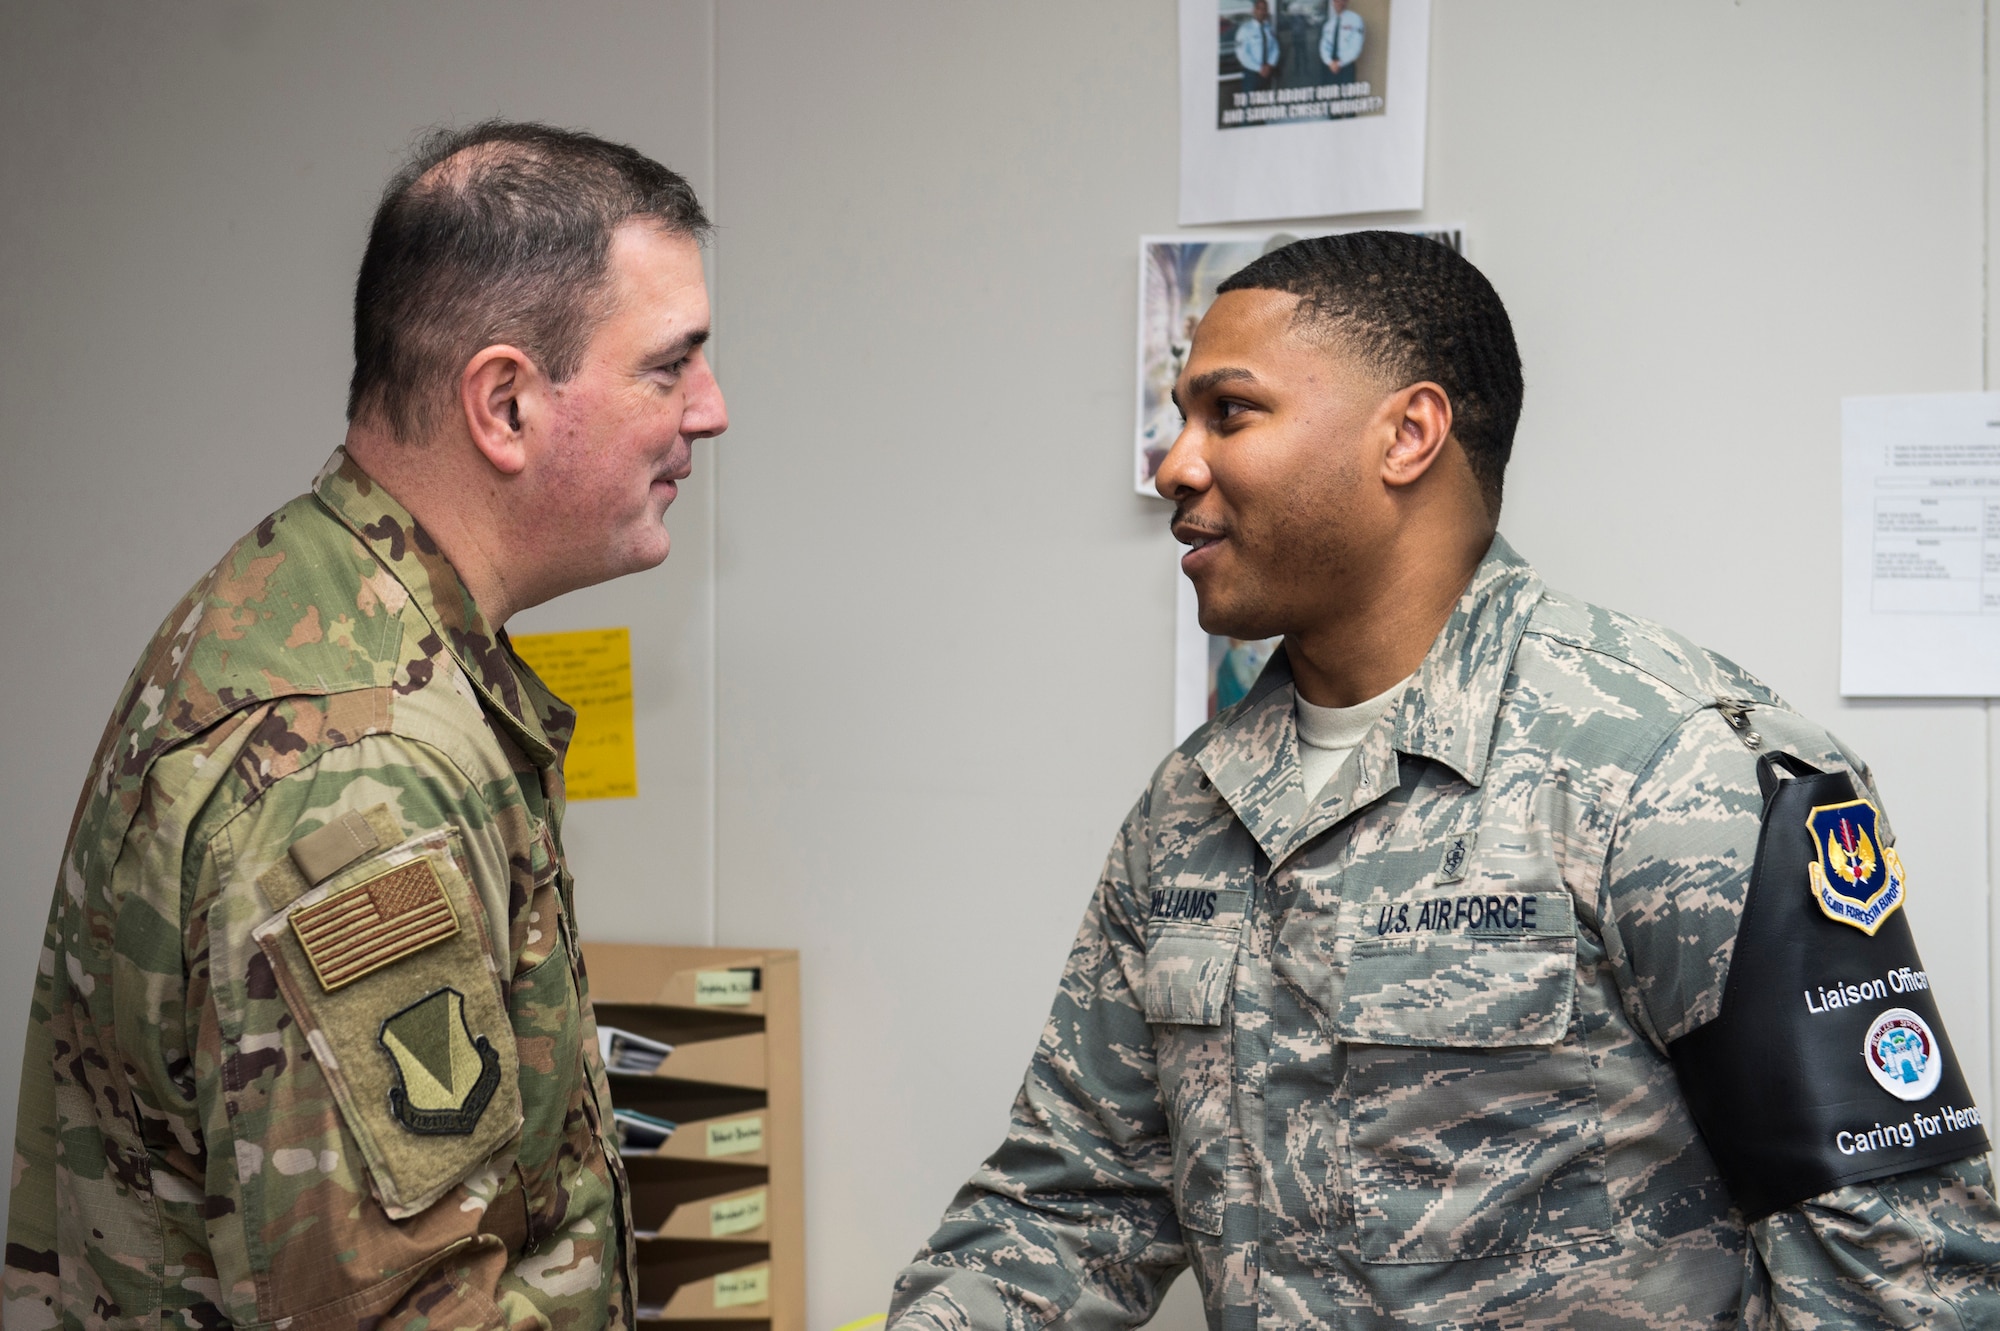 U.S. Air Force Staff Sgt. Antwan Williams, 86th Medical Squadron Air Force Liaison Officer, is recognized by U.S. Air Force Brig. Gen. Mark R. August, 86th Airlift Wing commander, for being the 86th AW’s Airlifter of the Week at Landstuhl Regional Medical Center, Germany, Feb. 14, 2019. Williams went above and beyond his normal duties providing advanced medical and quality of life care for two patients being airlifted home. (U.S. Air Force photo by Staff Sgt. Jonathan Bass)